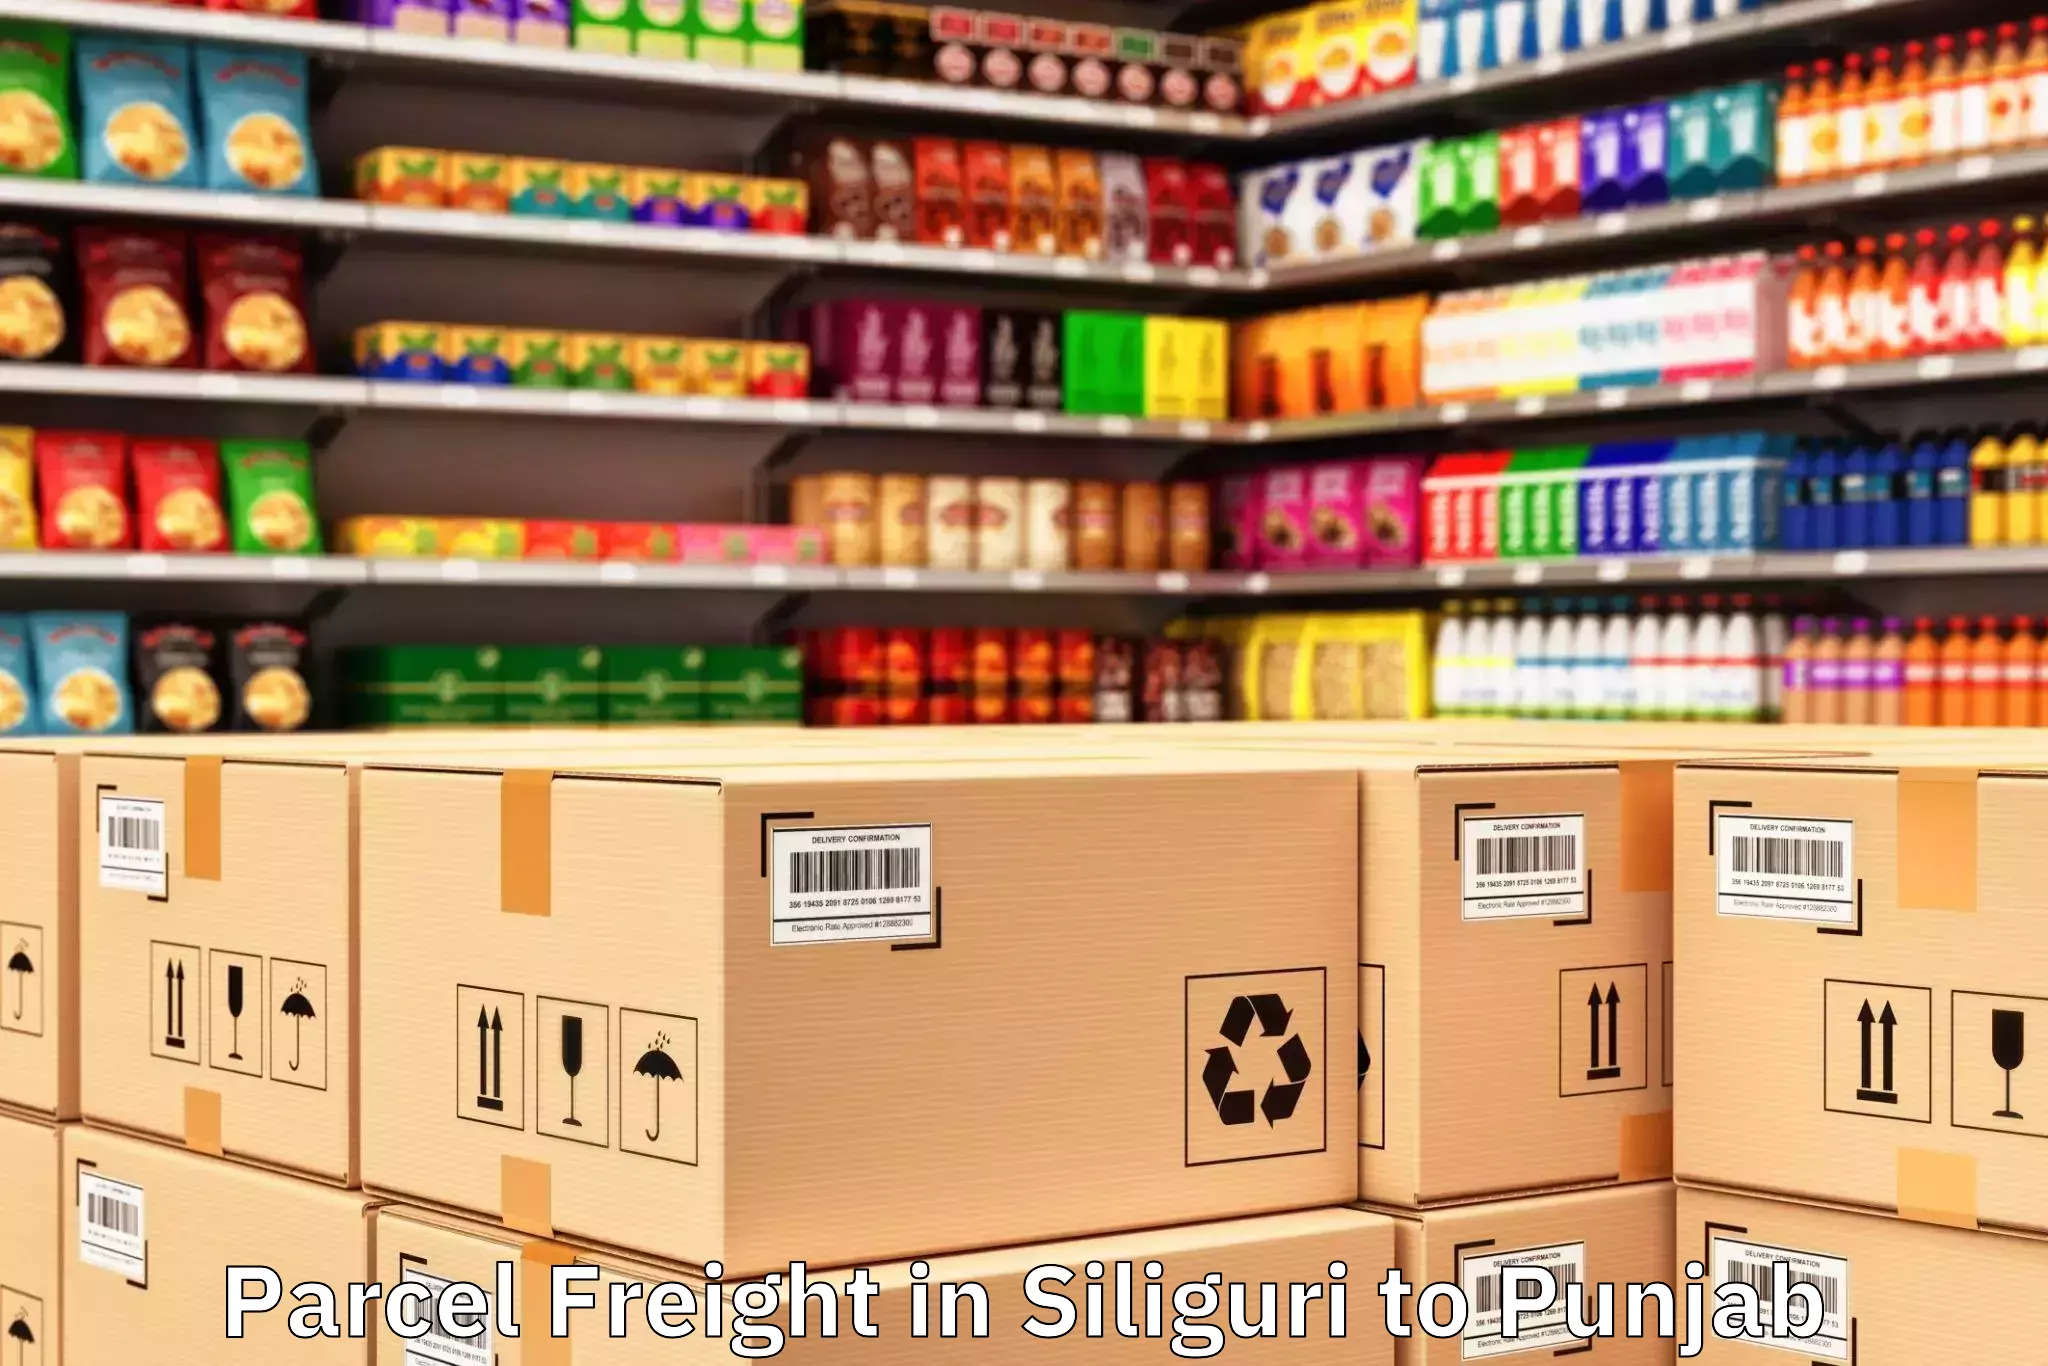 Top Siliguri to Nurmahal Parcel Freight Available